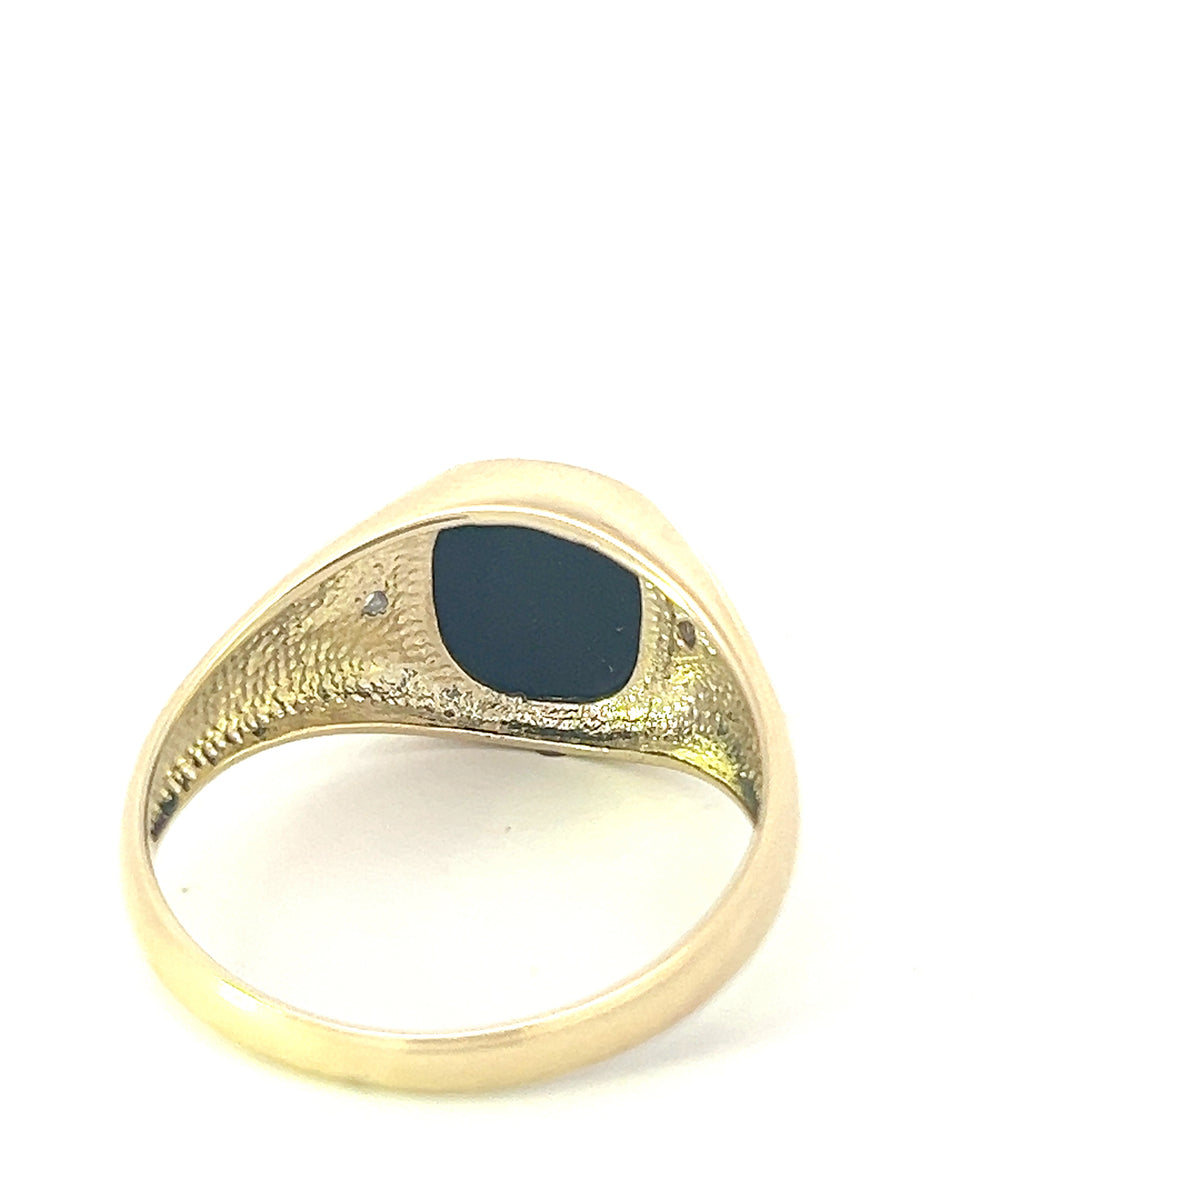 10K Yellow Gold Onyx and 0.02cttw Diamond Gents Ring, size 10